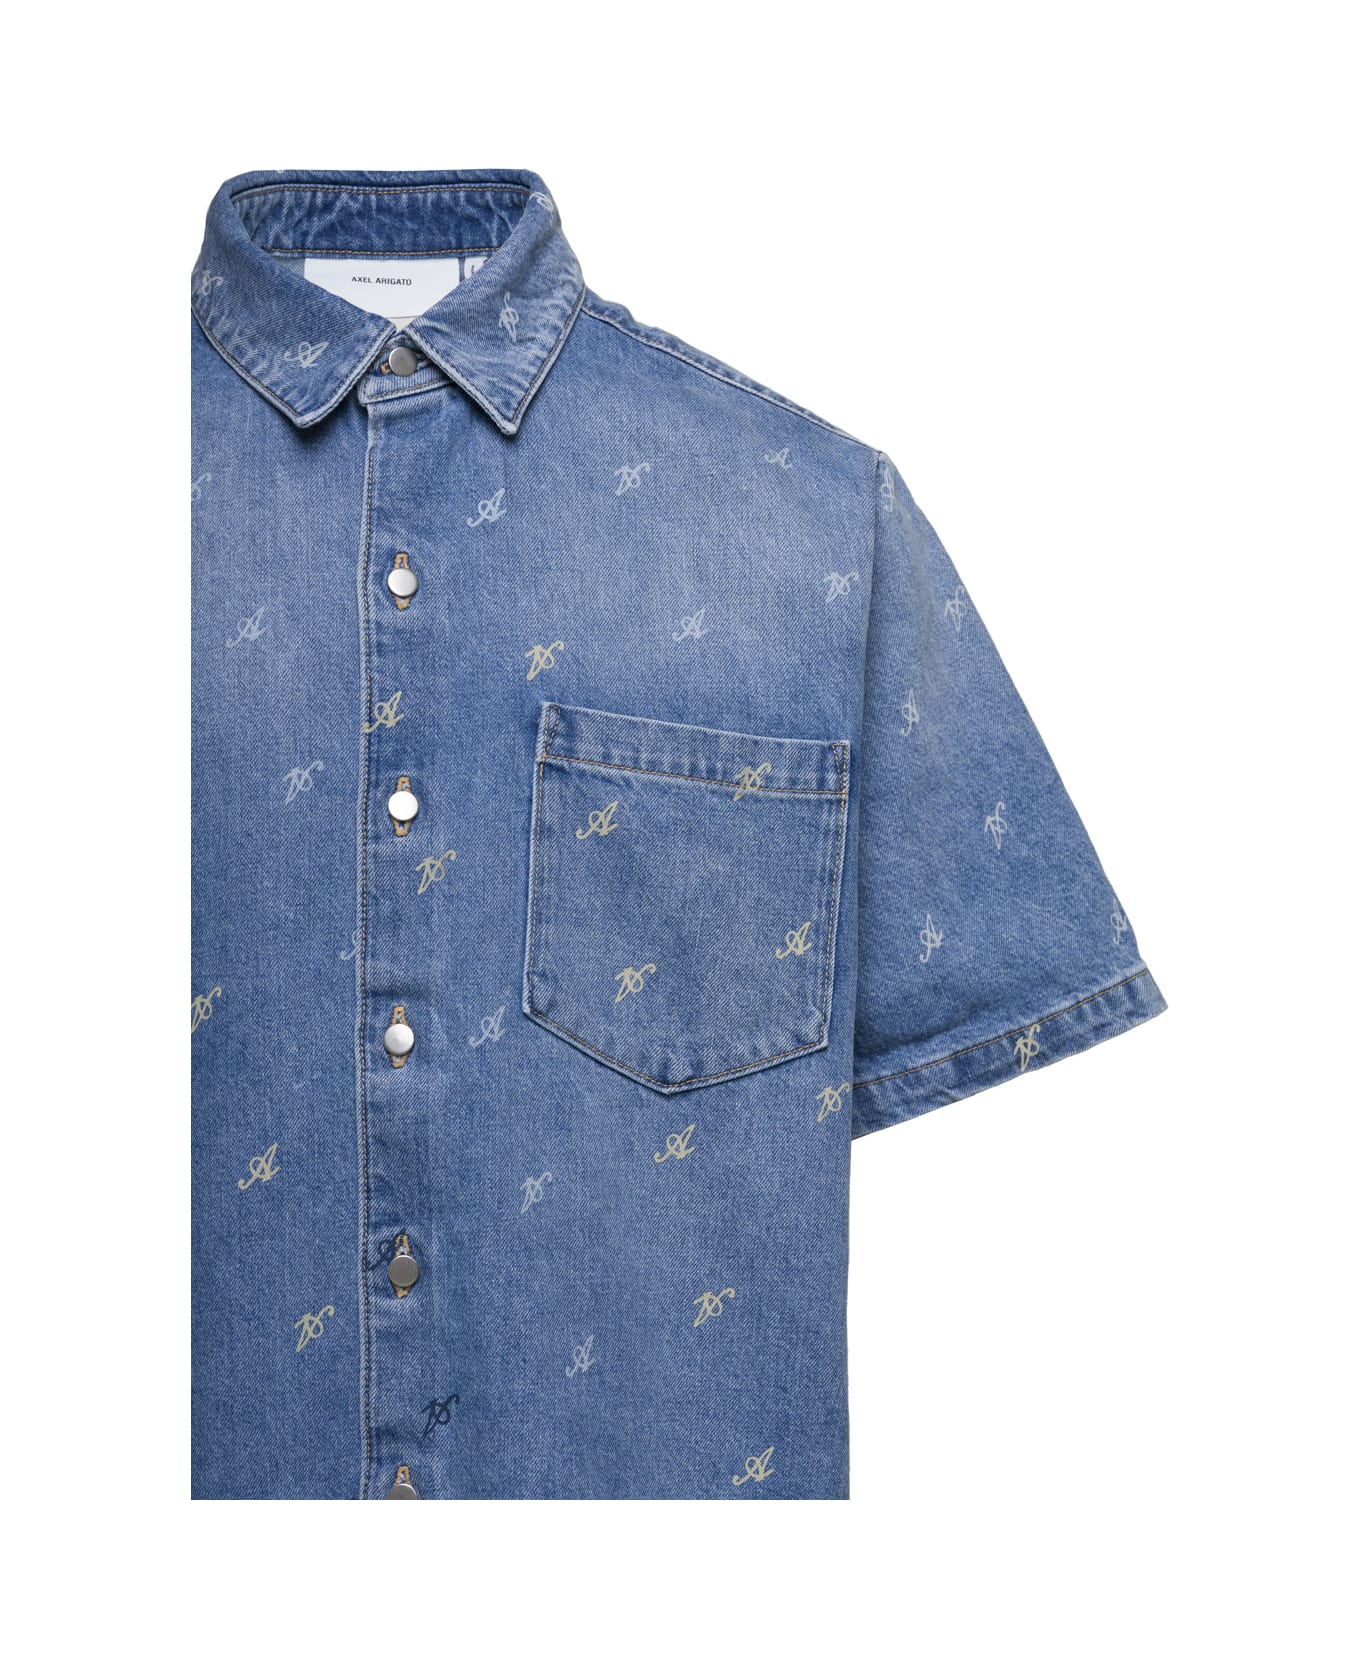 Axel Arigato Blue Jeans Shirt With Logo All Over In Denim Man - Blu